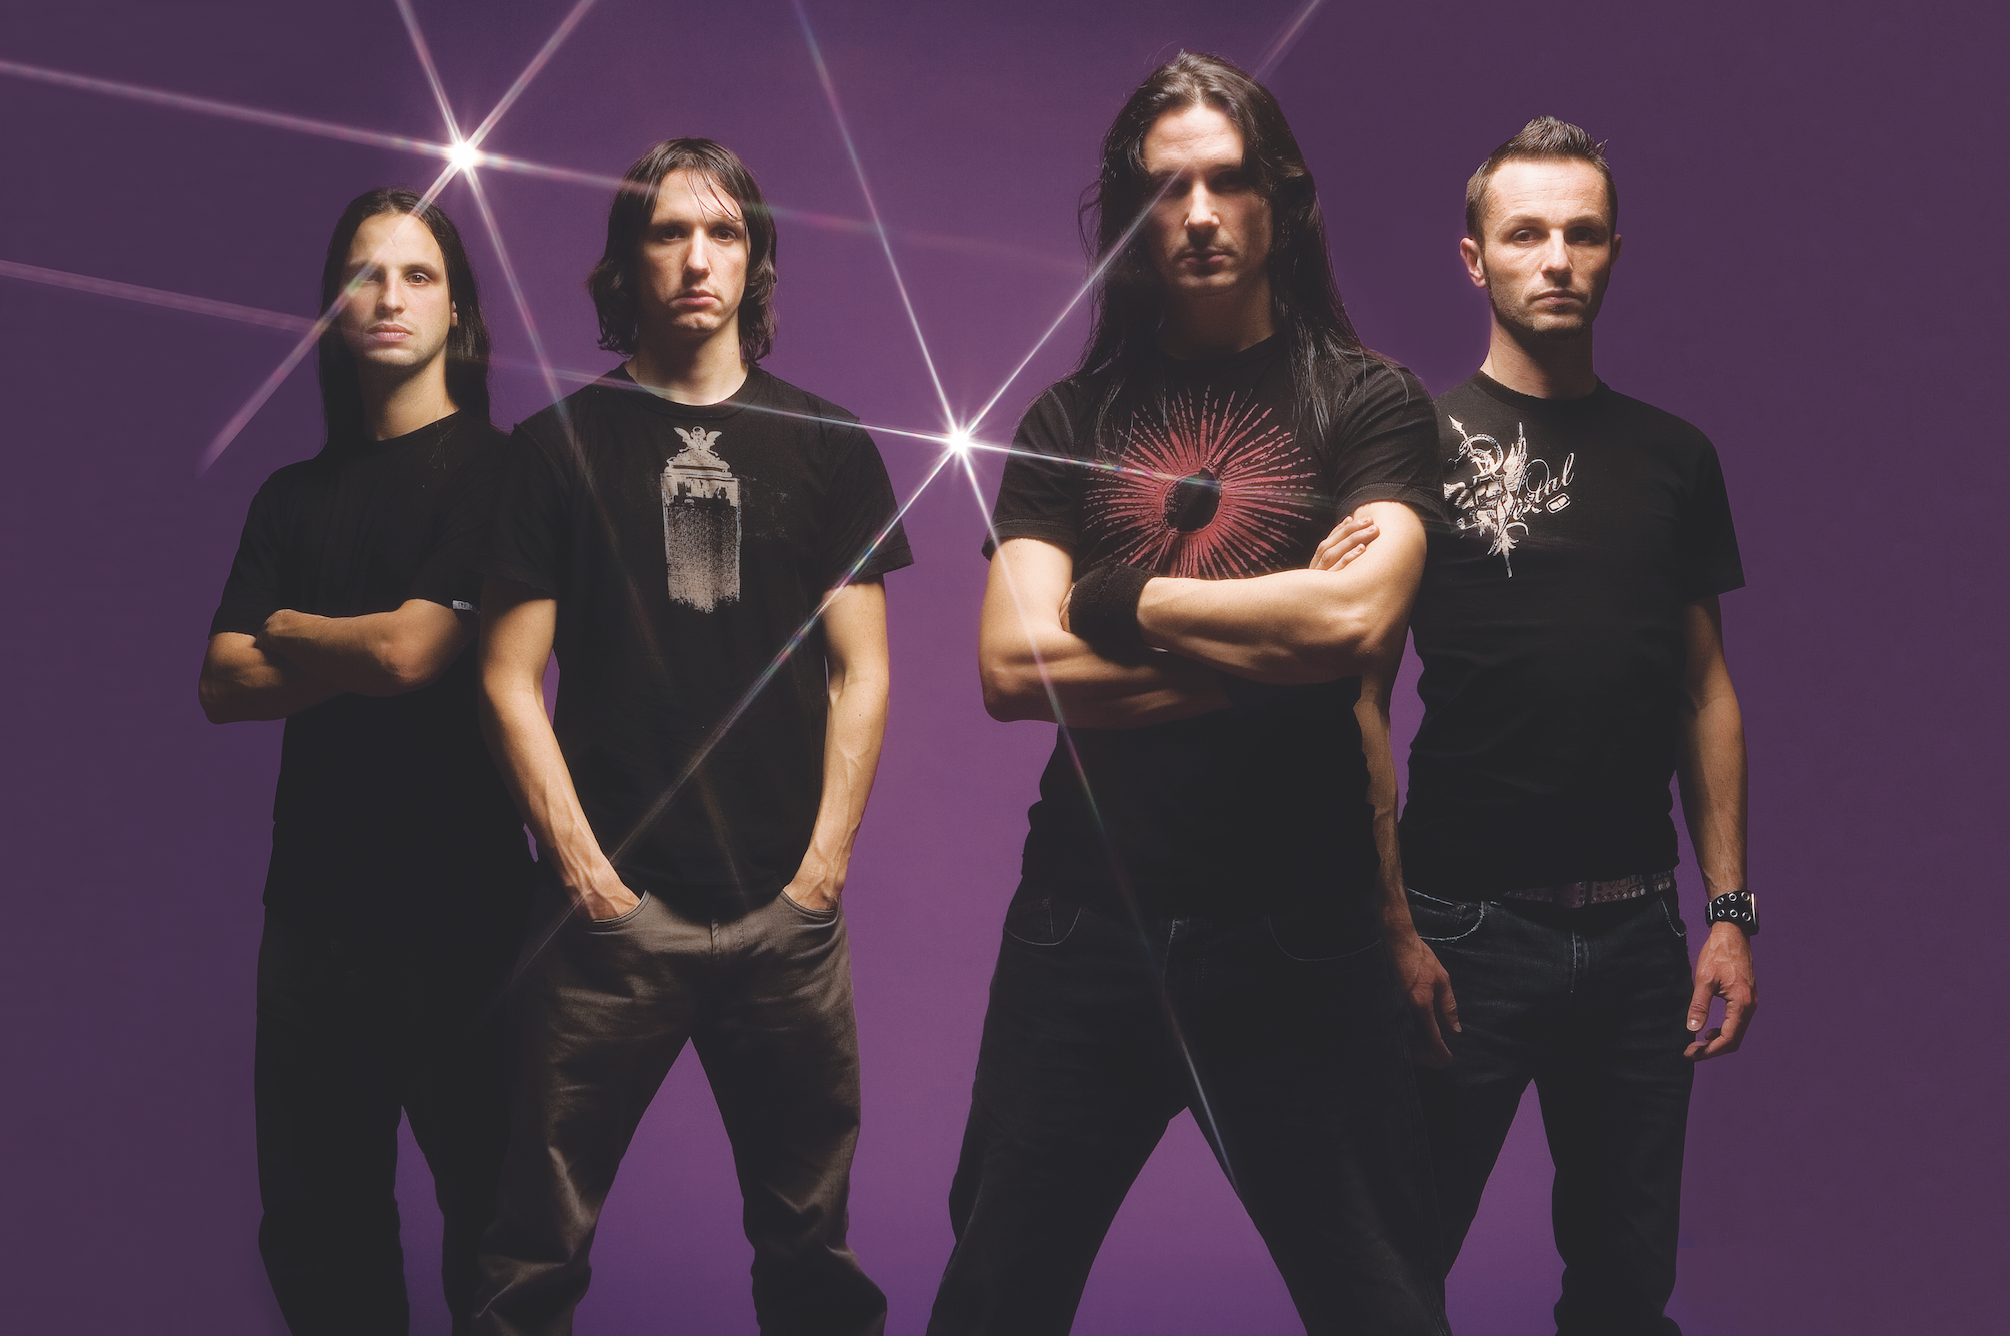 HD wallpaper featuring a group of four band members with a vibrant purple background, emphasizing a rock theme for a desktop background tagged with Gojira.